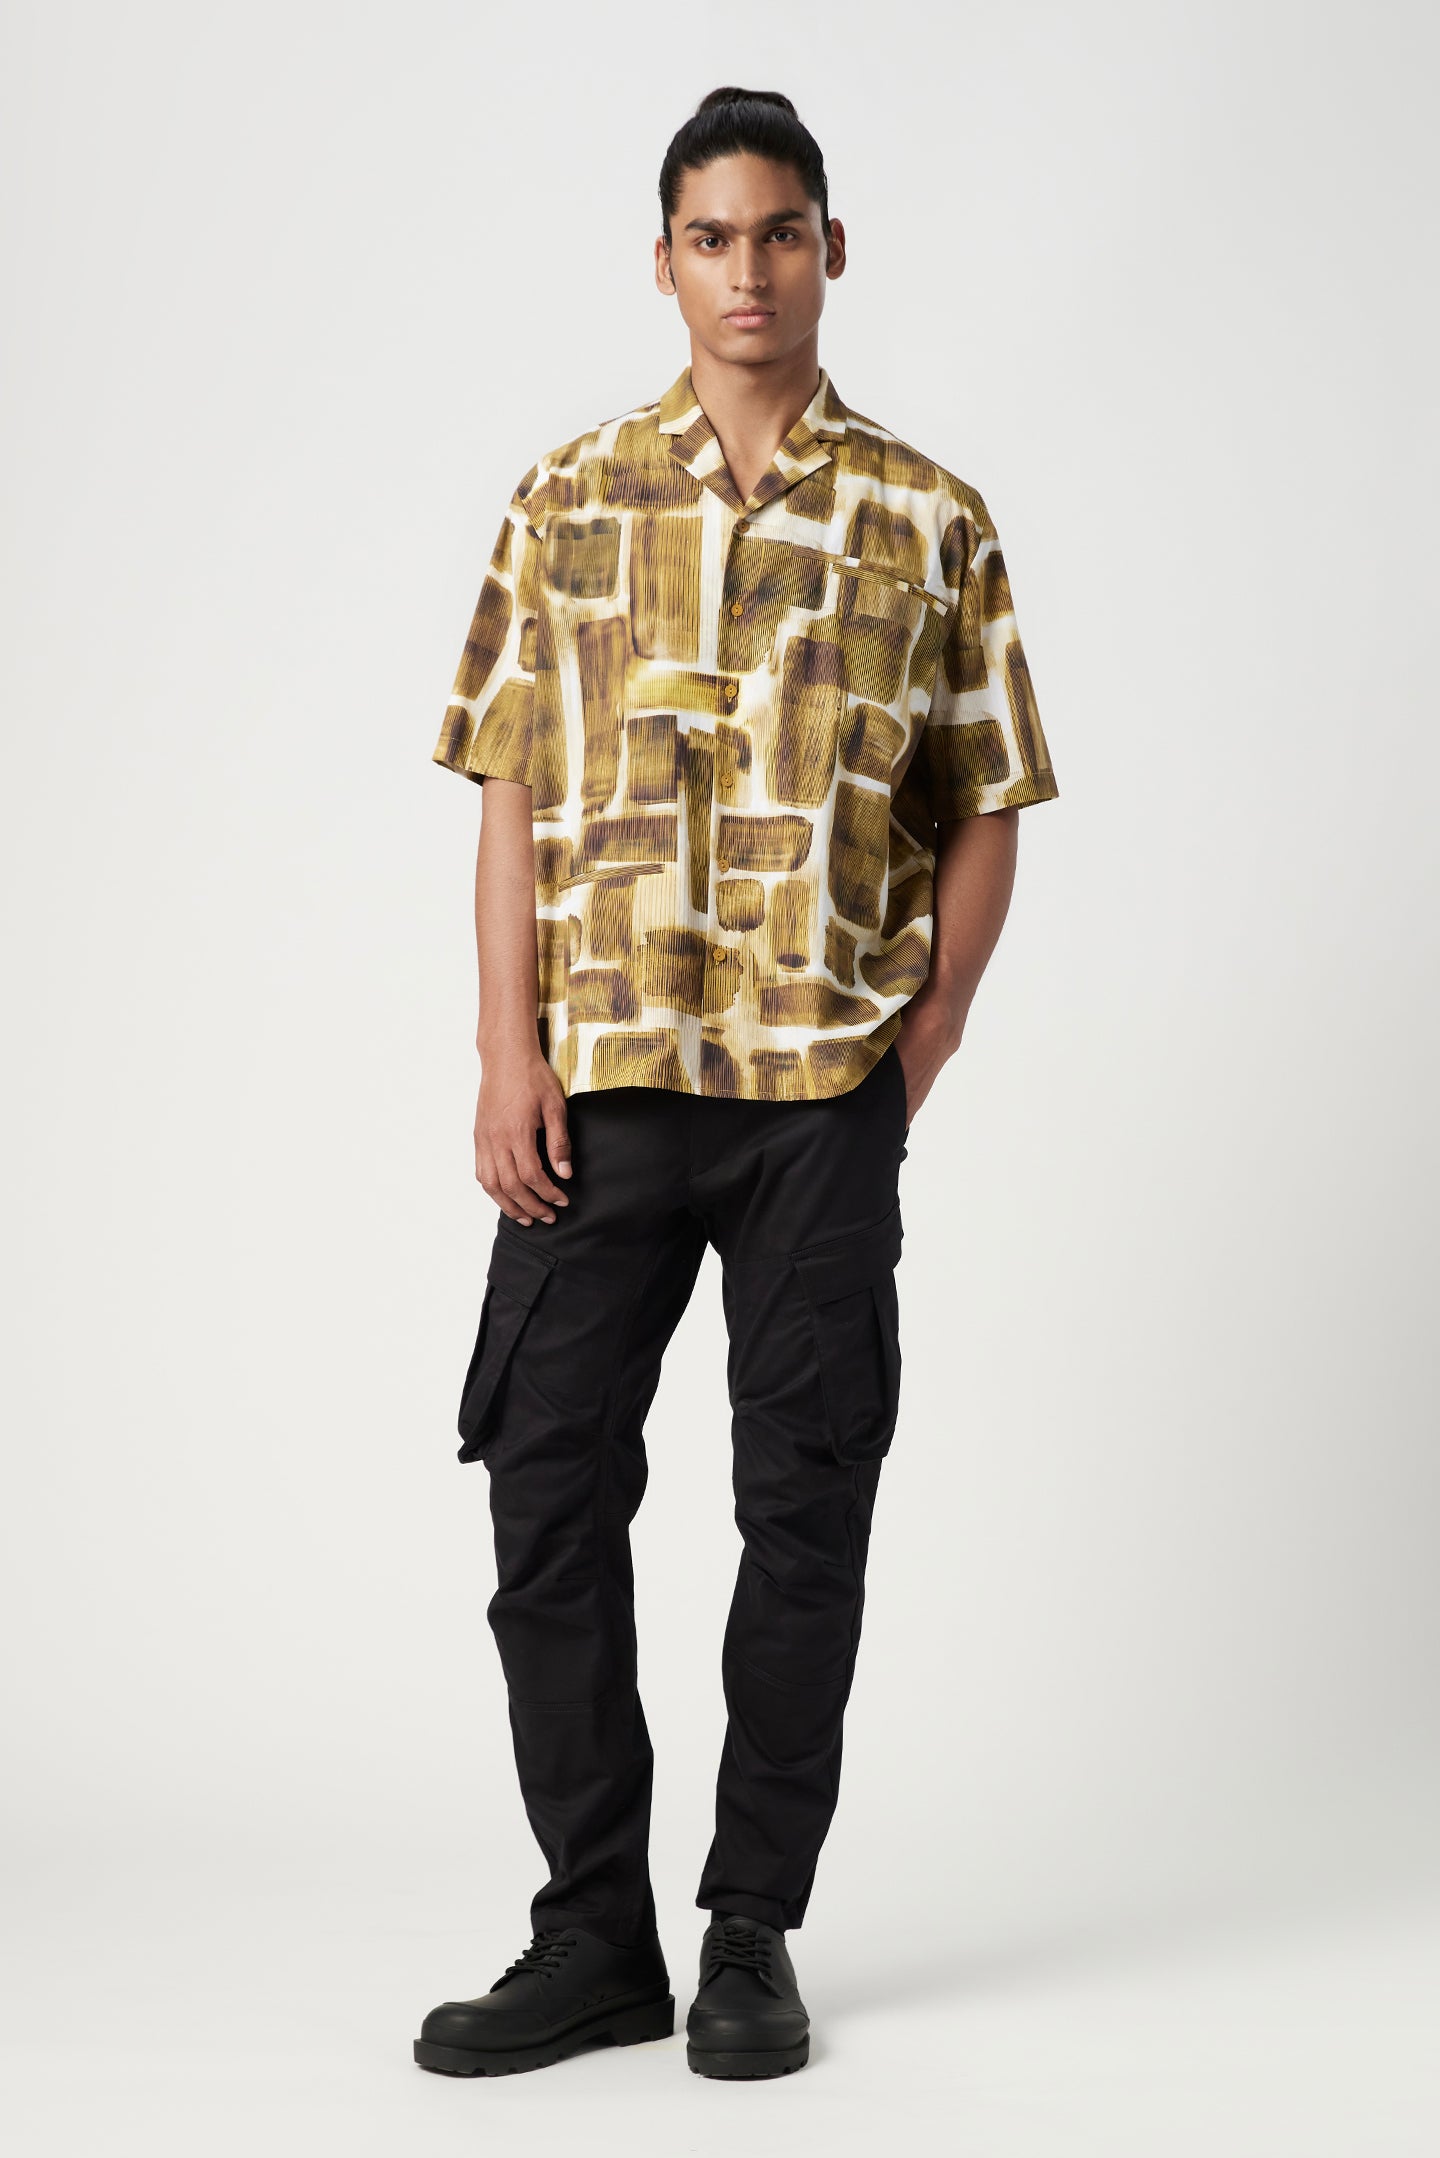 Easy Fit Half Sleeve Collar Shirt in an All-Over Abstract Check Print